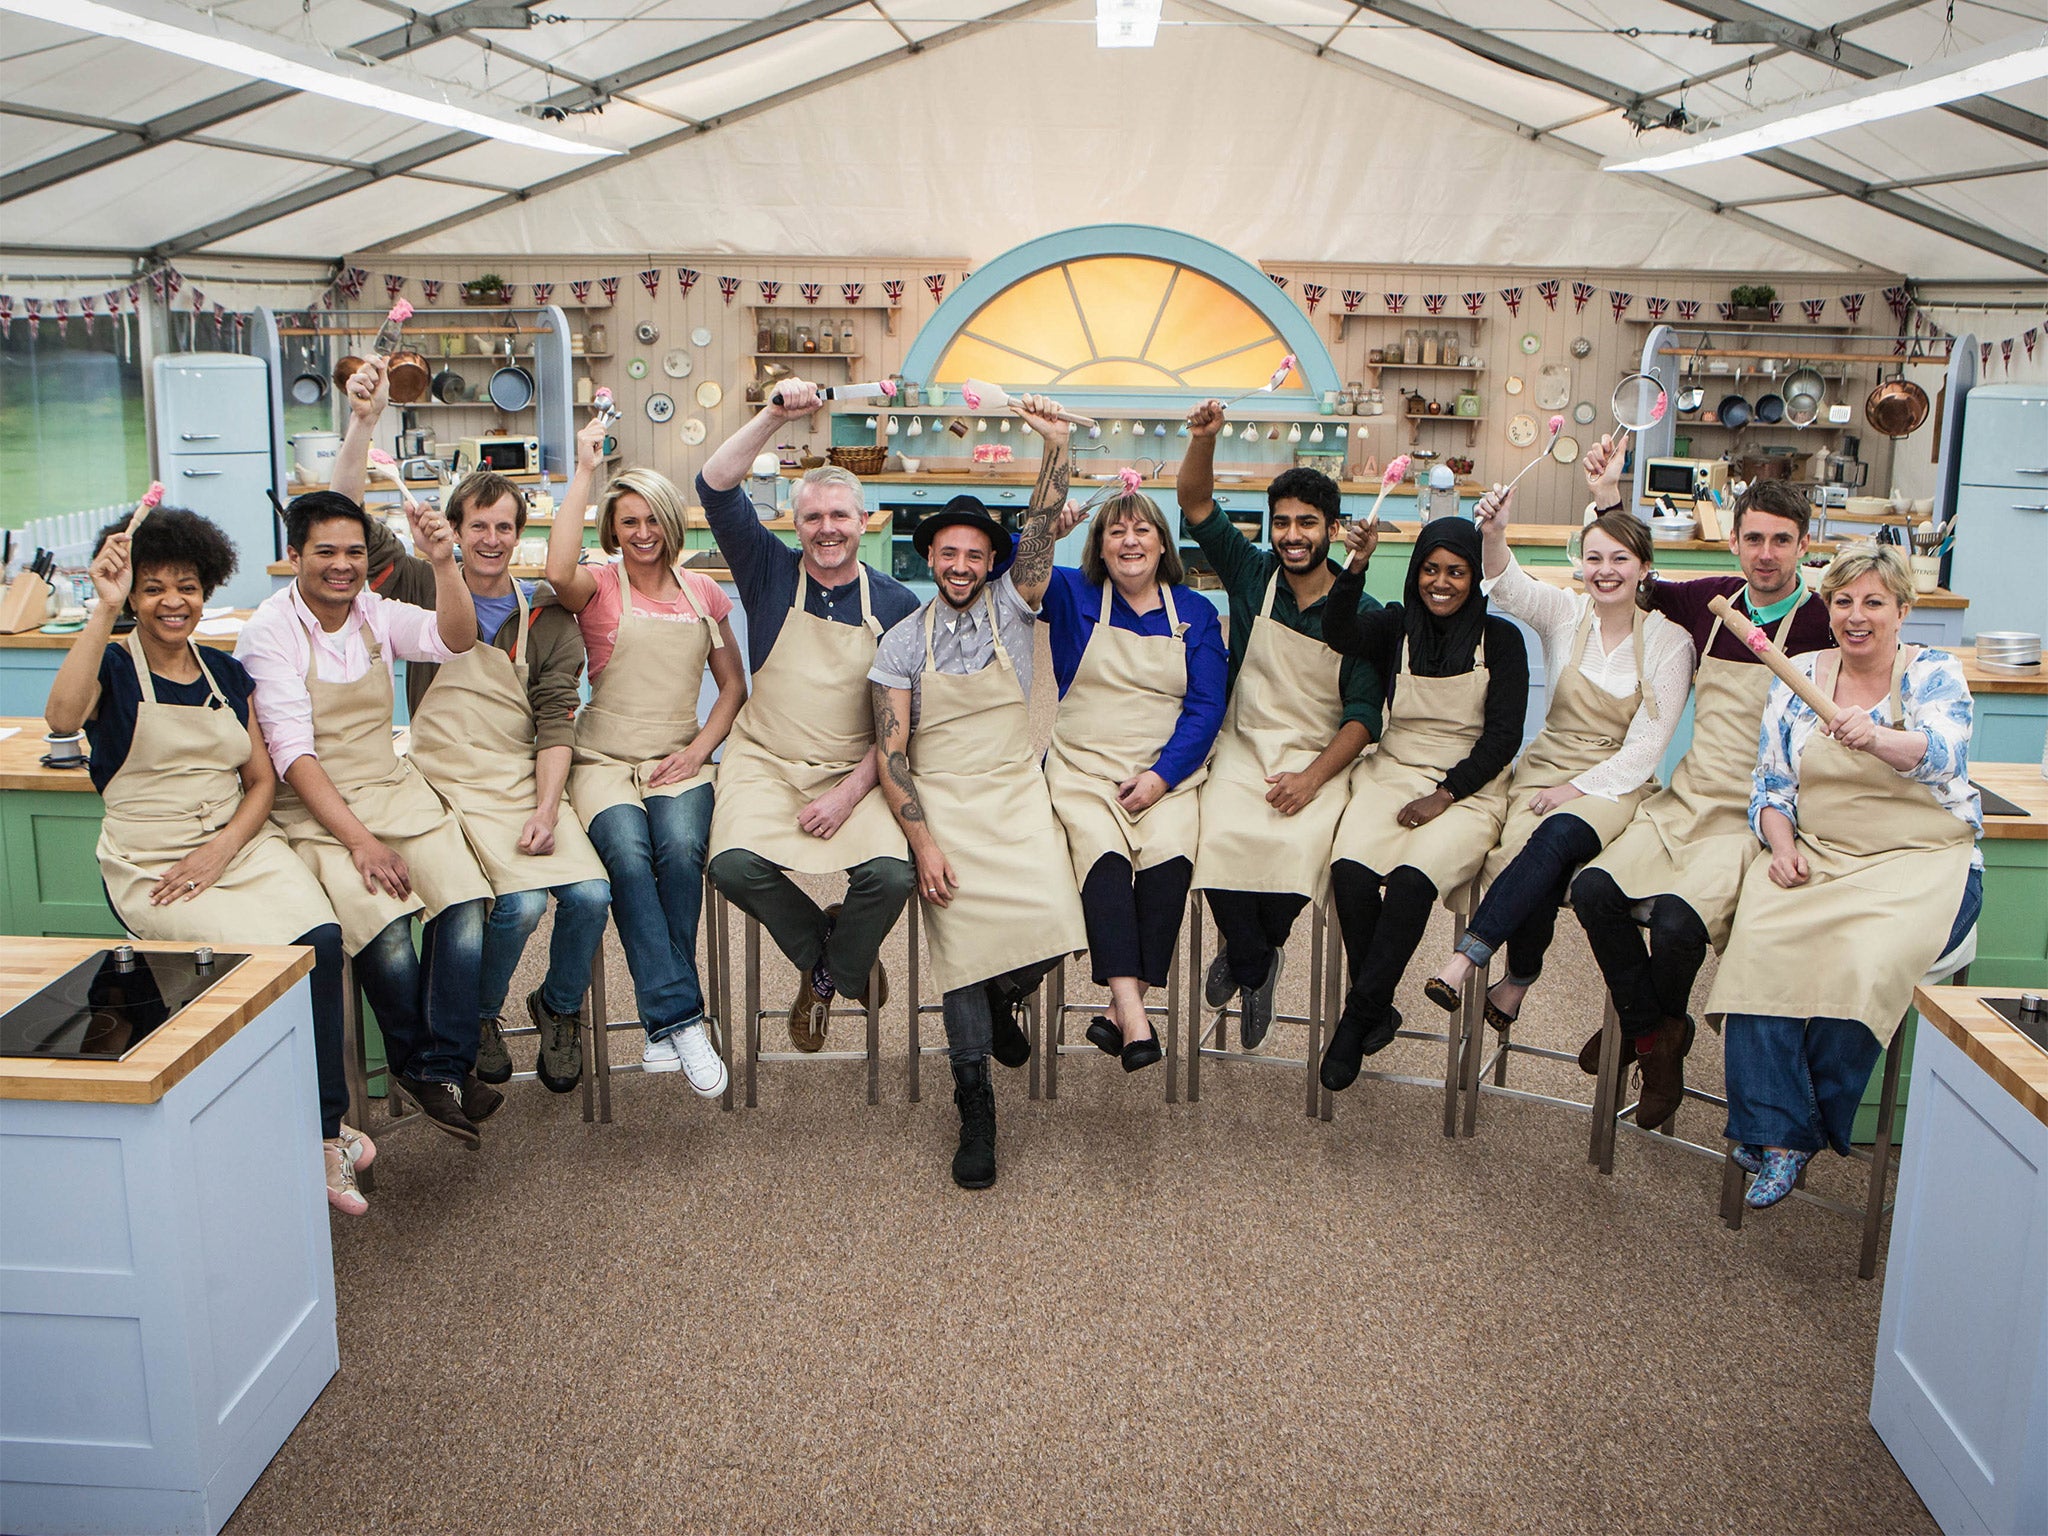 ‘The Great British Bake Off’ 2015 competitors in the kitchen